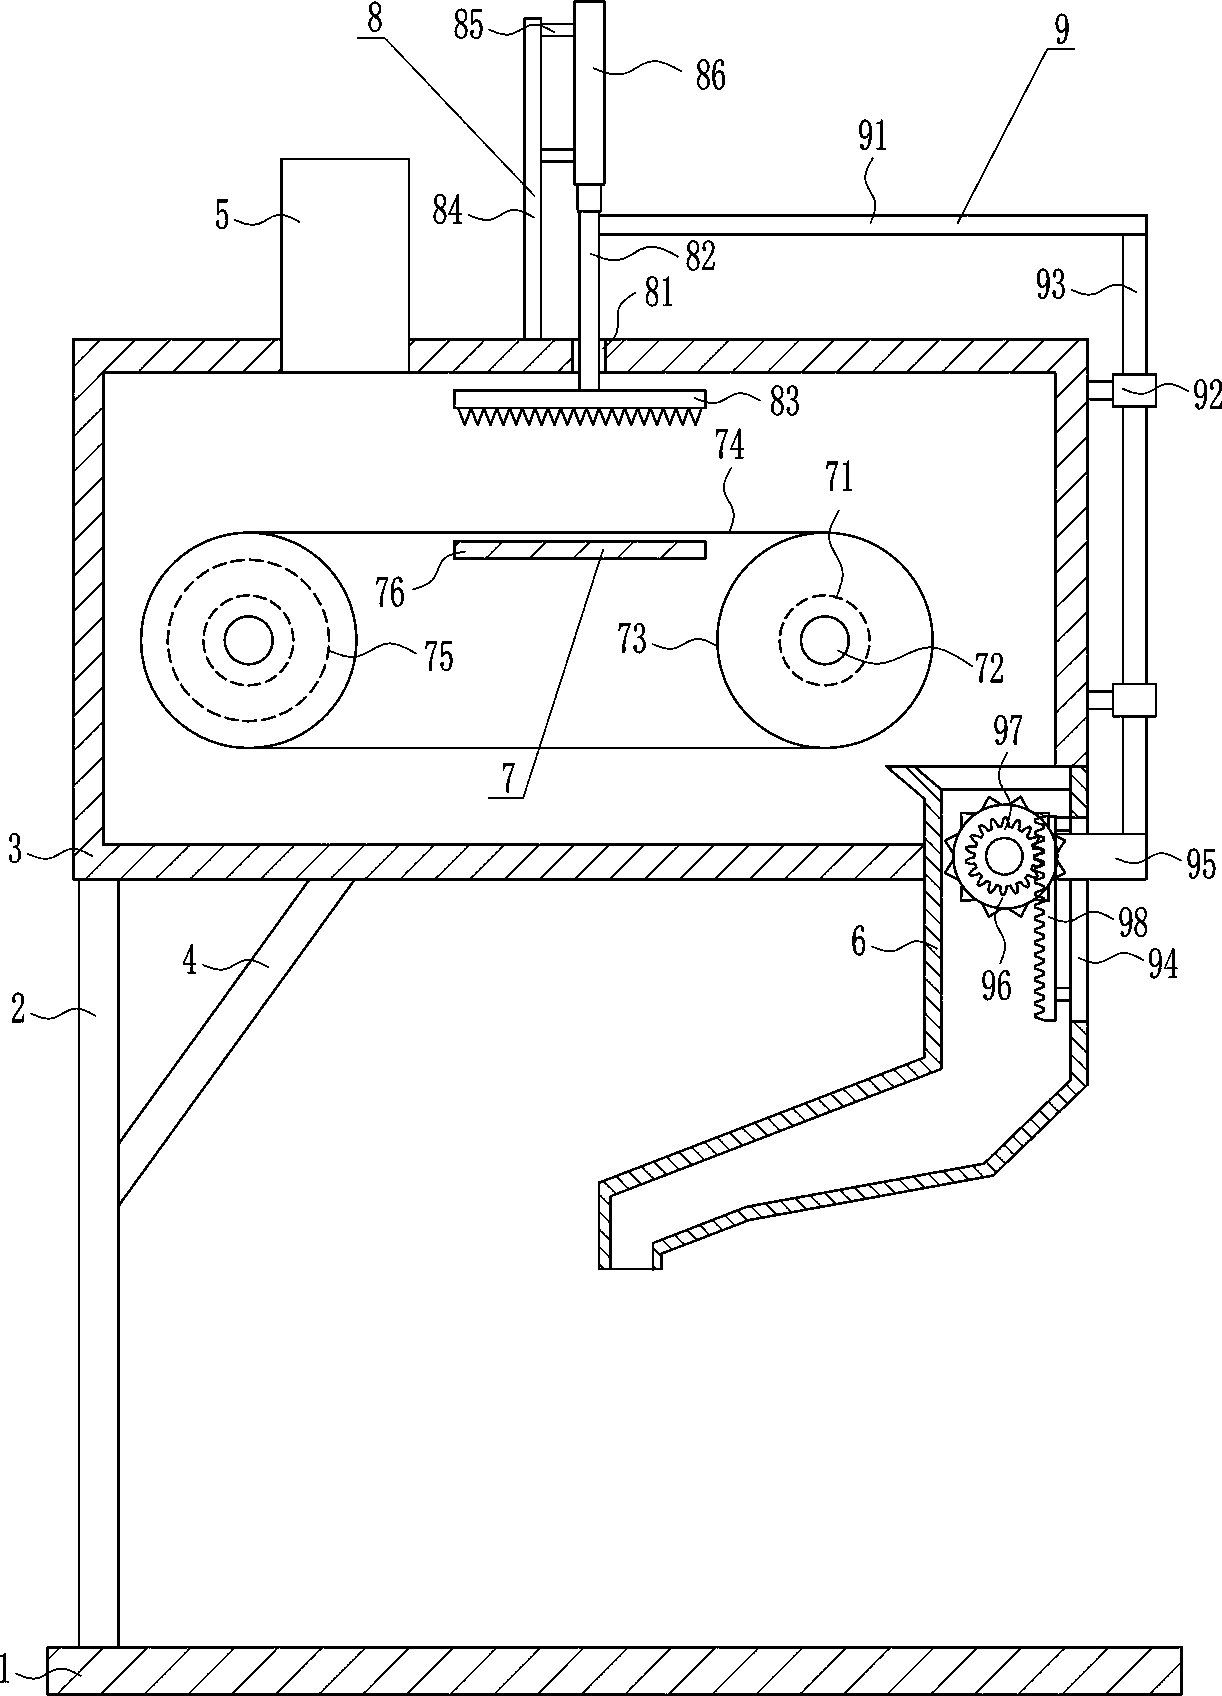 Crushing device for medical glass infusion bottles